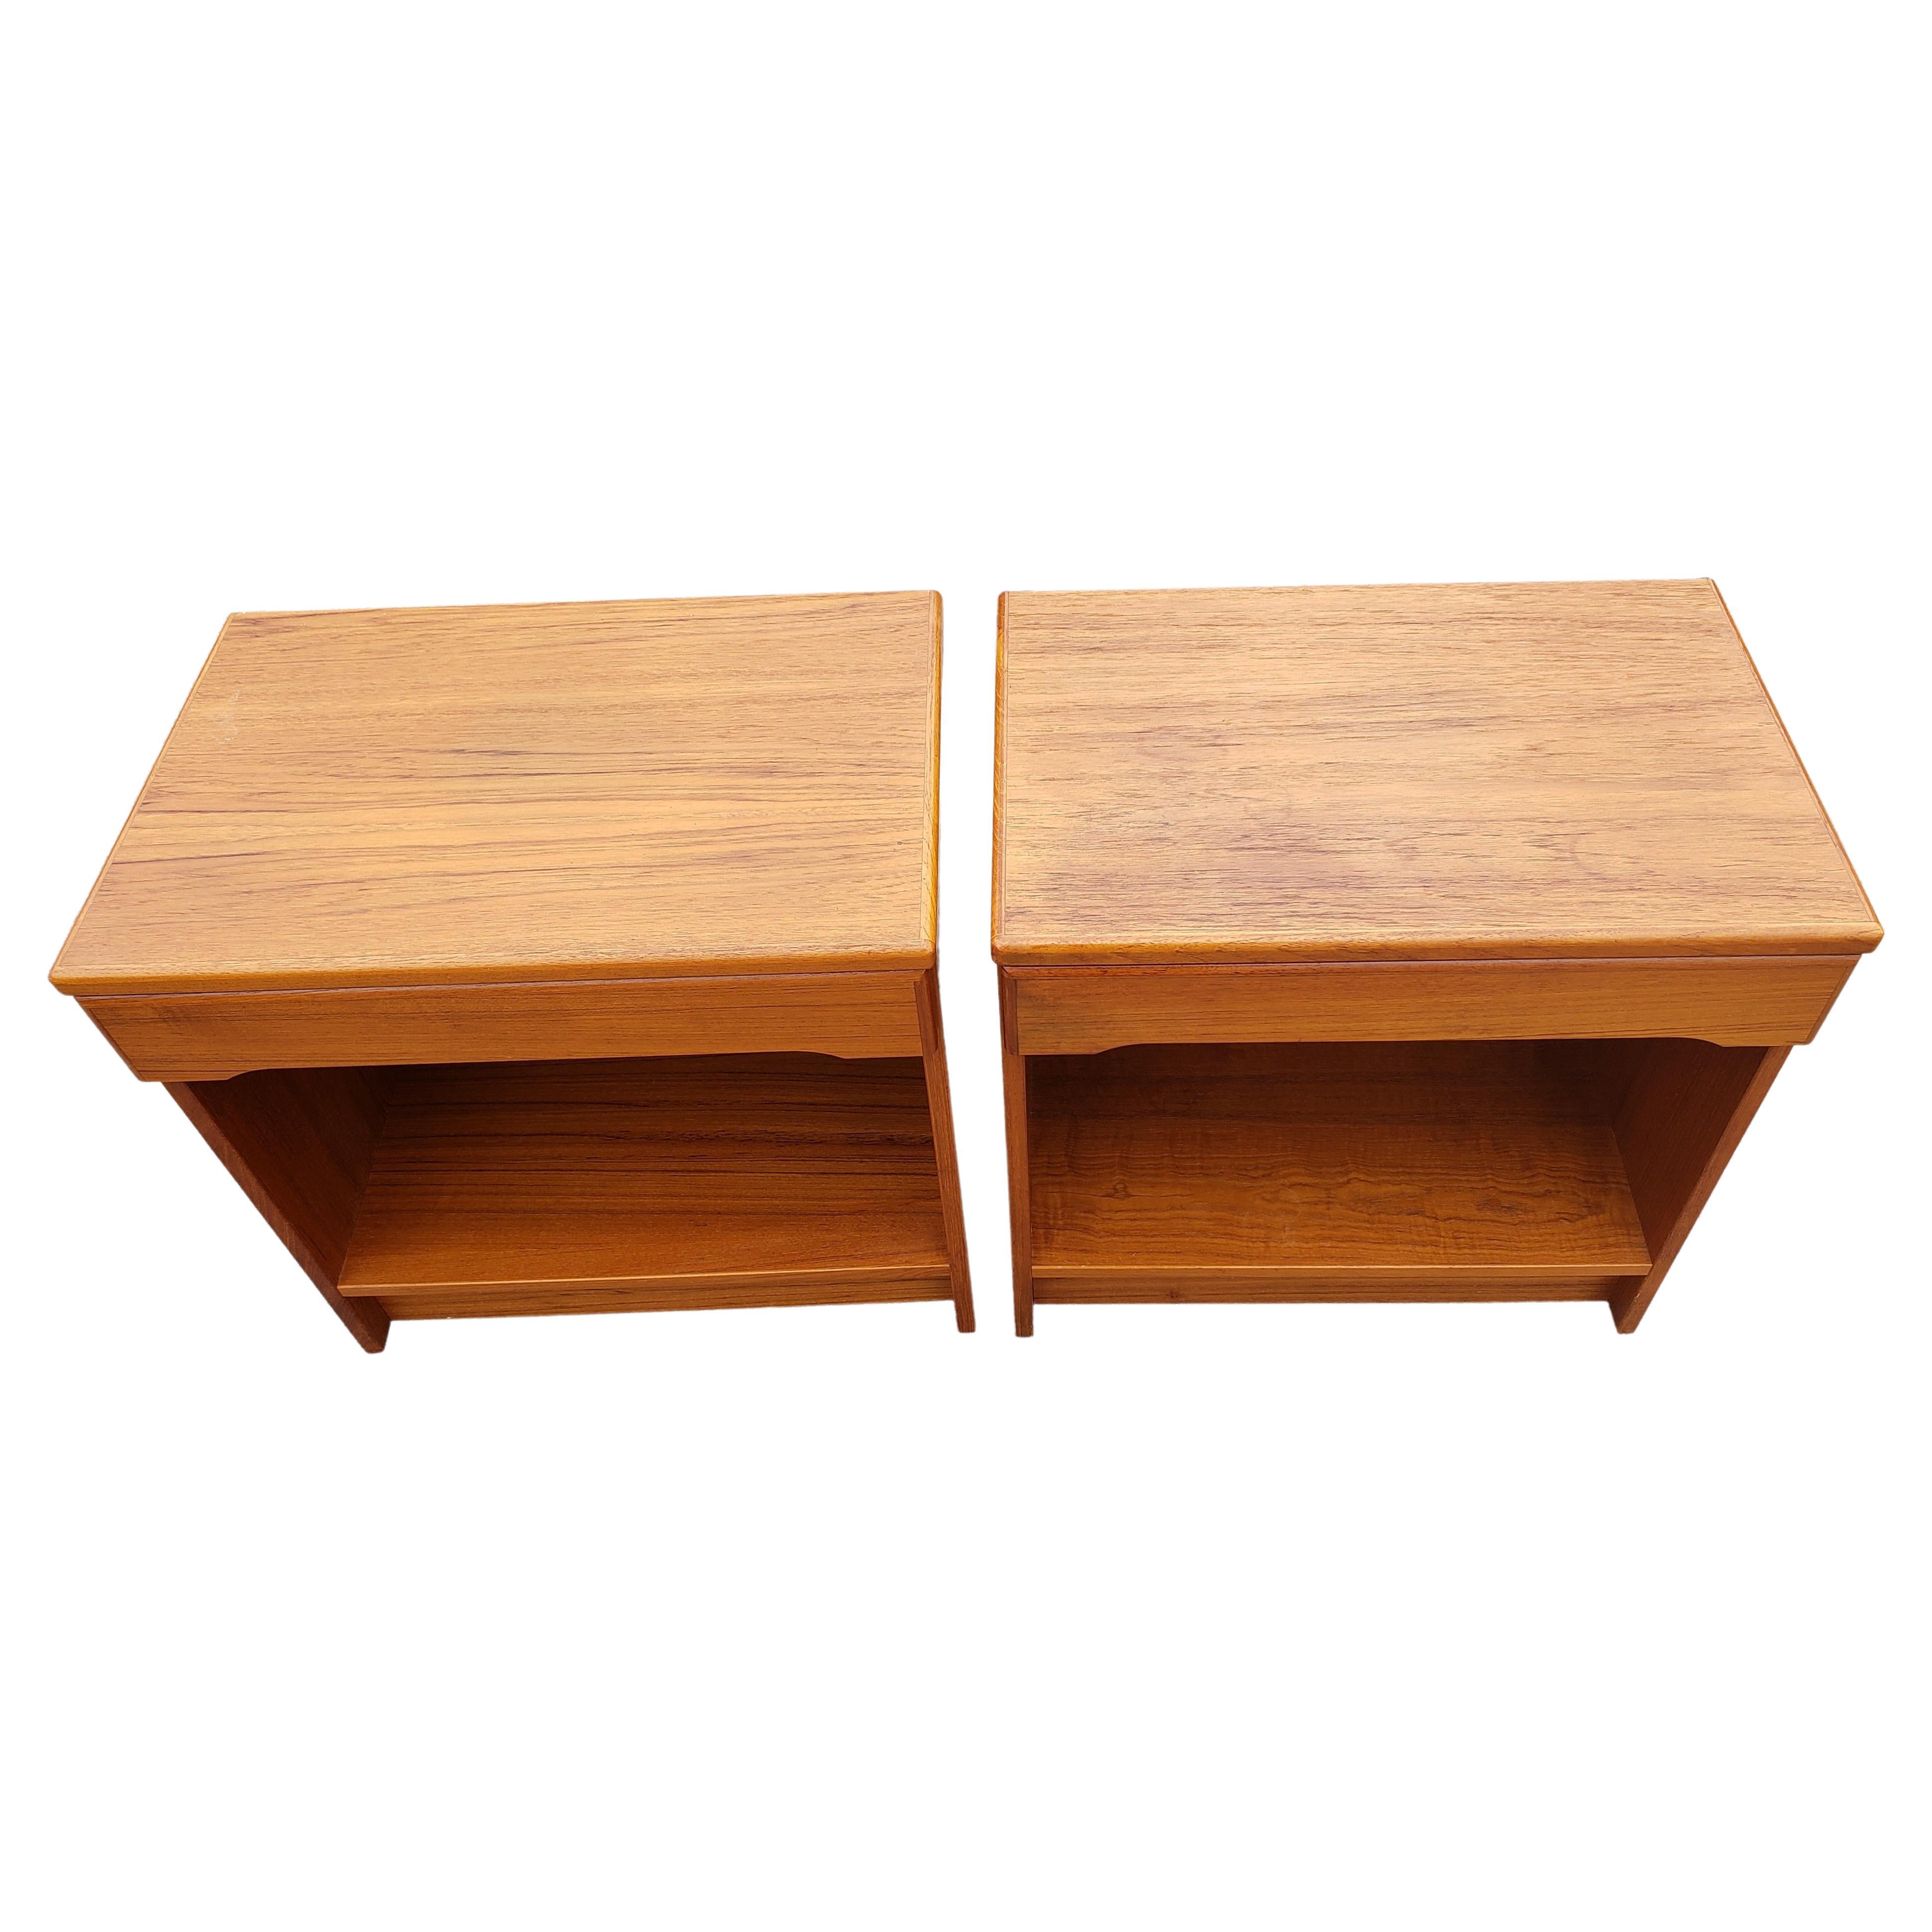 A pair Danish modern teak one drawer nightstands with bottom shelf. 
Clean vintage condition. 
Measures 22